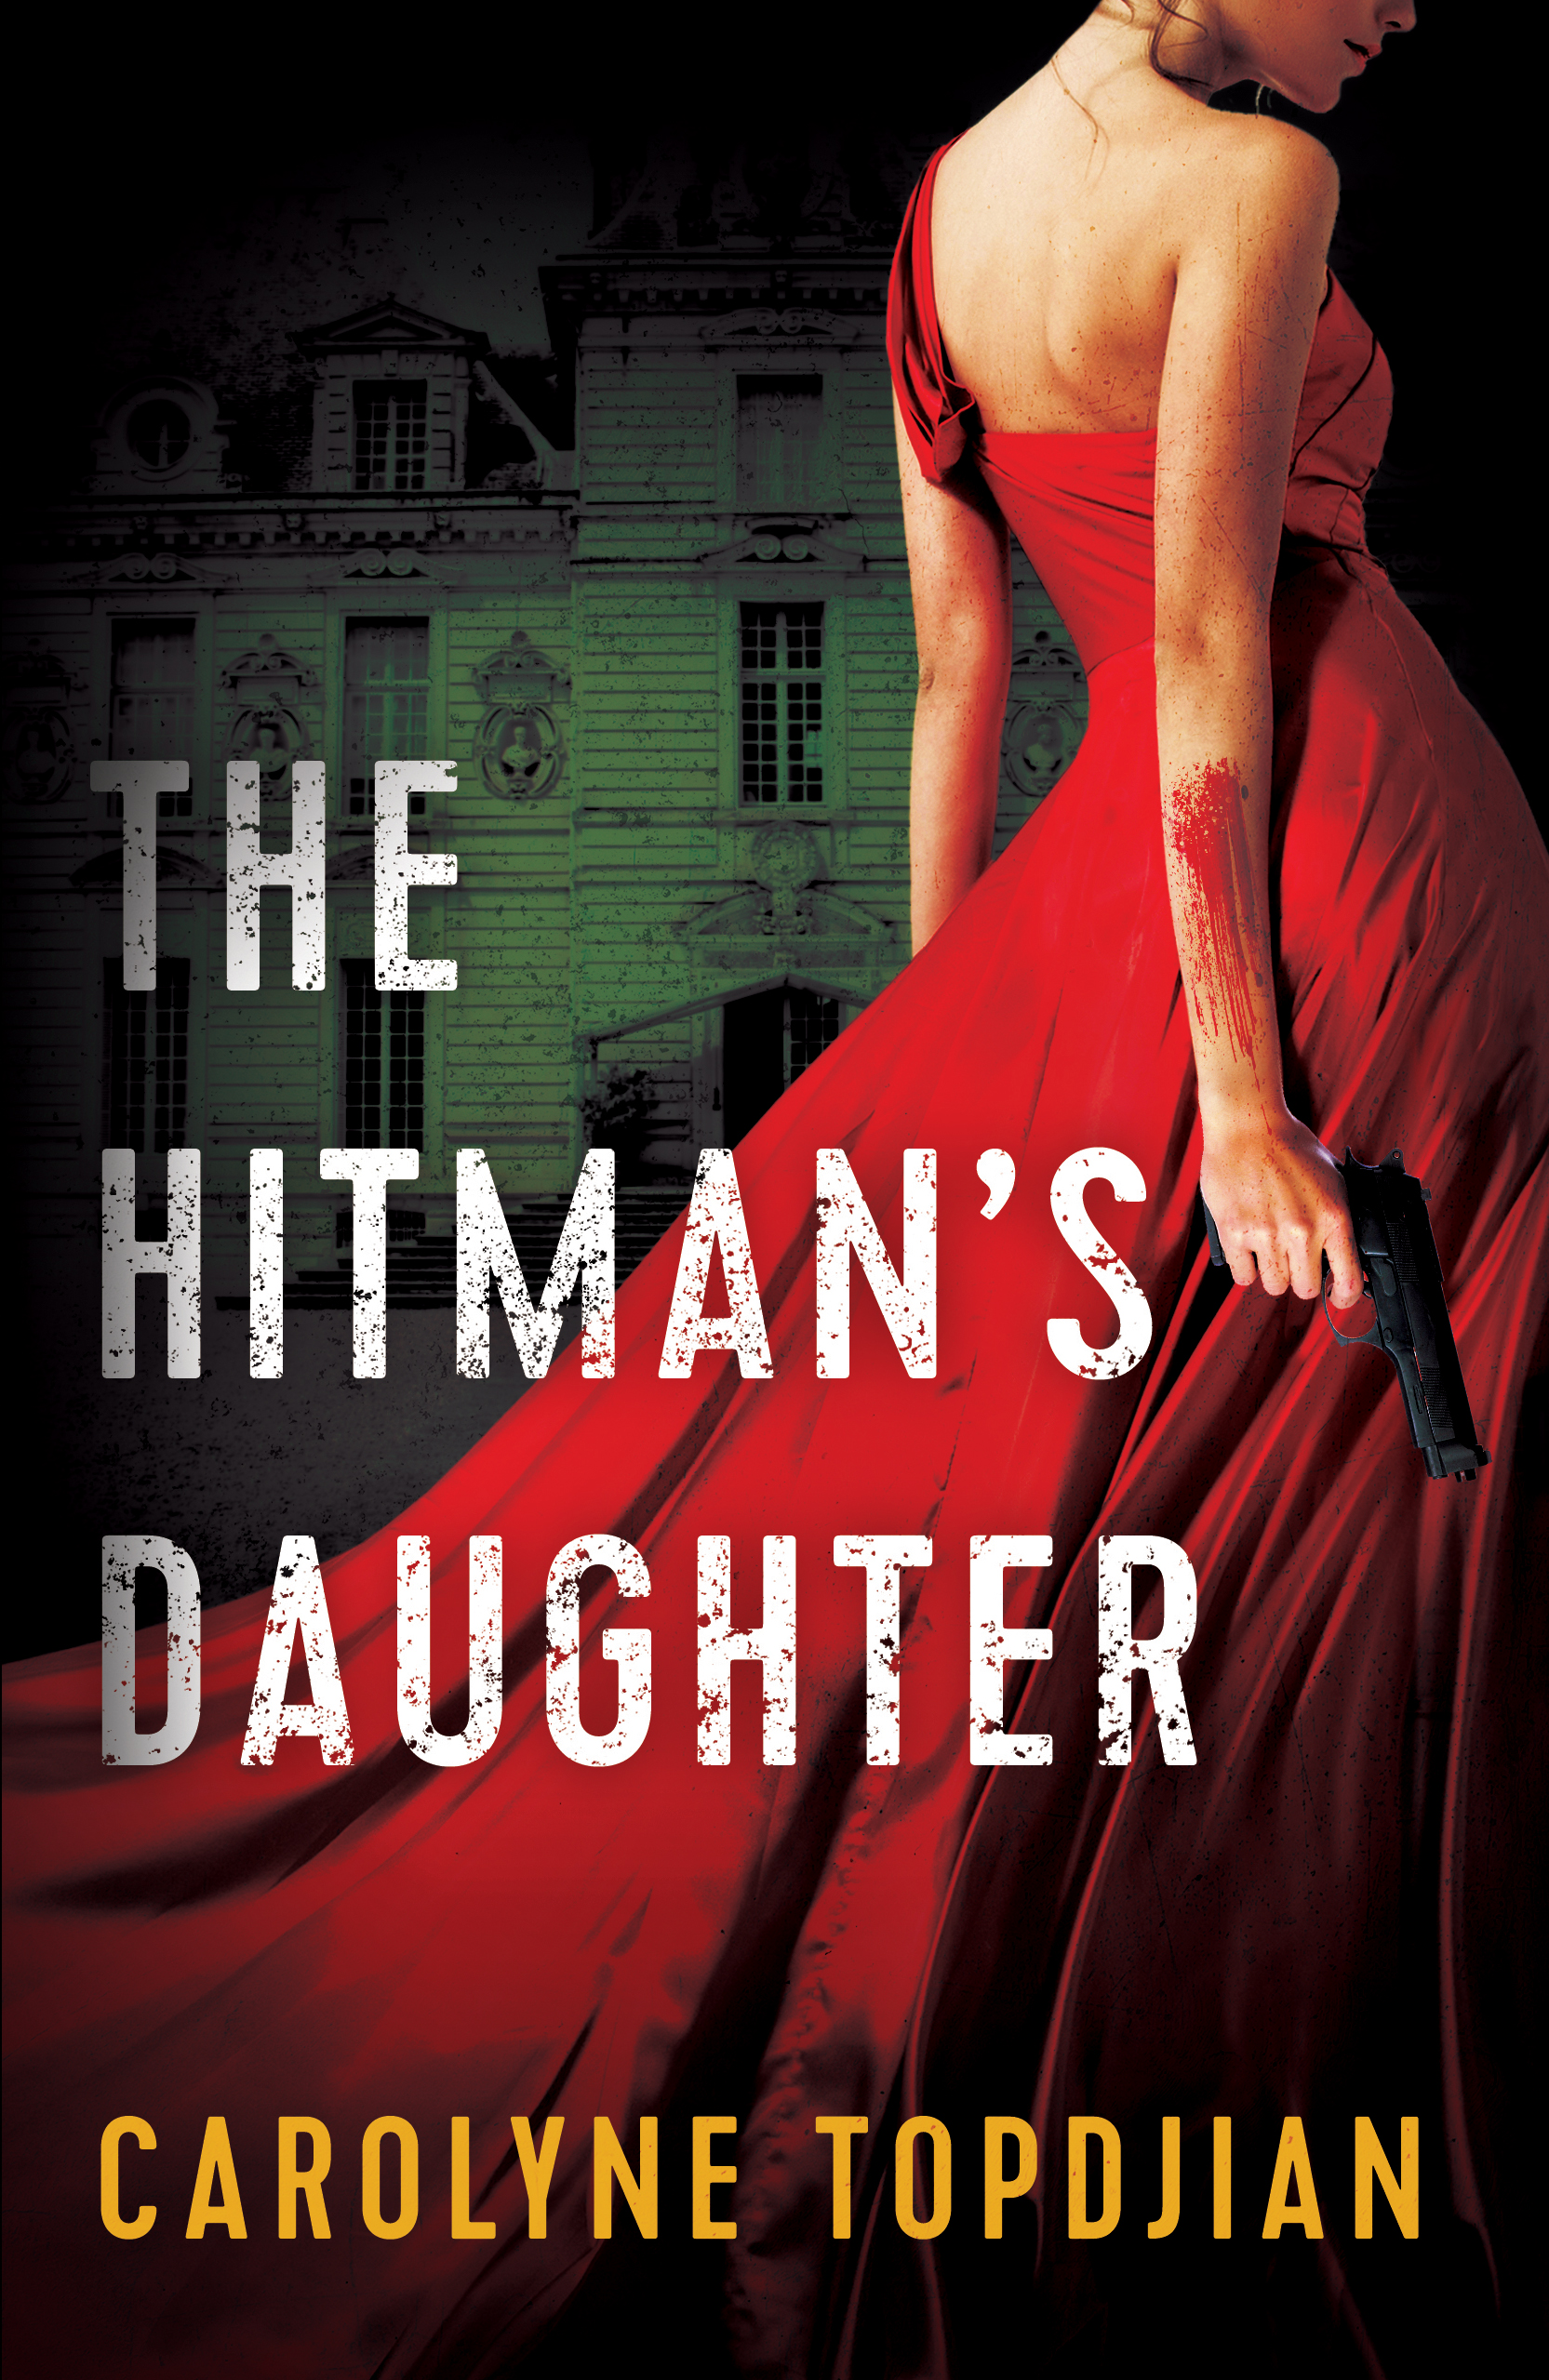 The Hitman's Daughter book cover